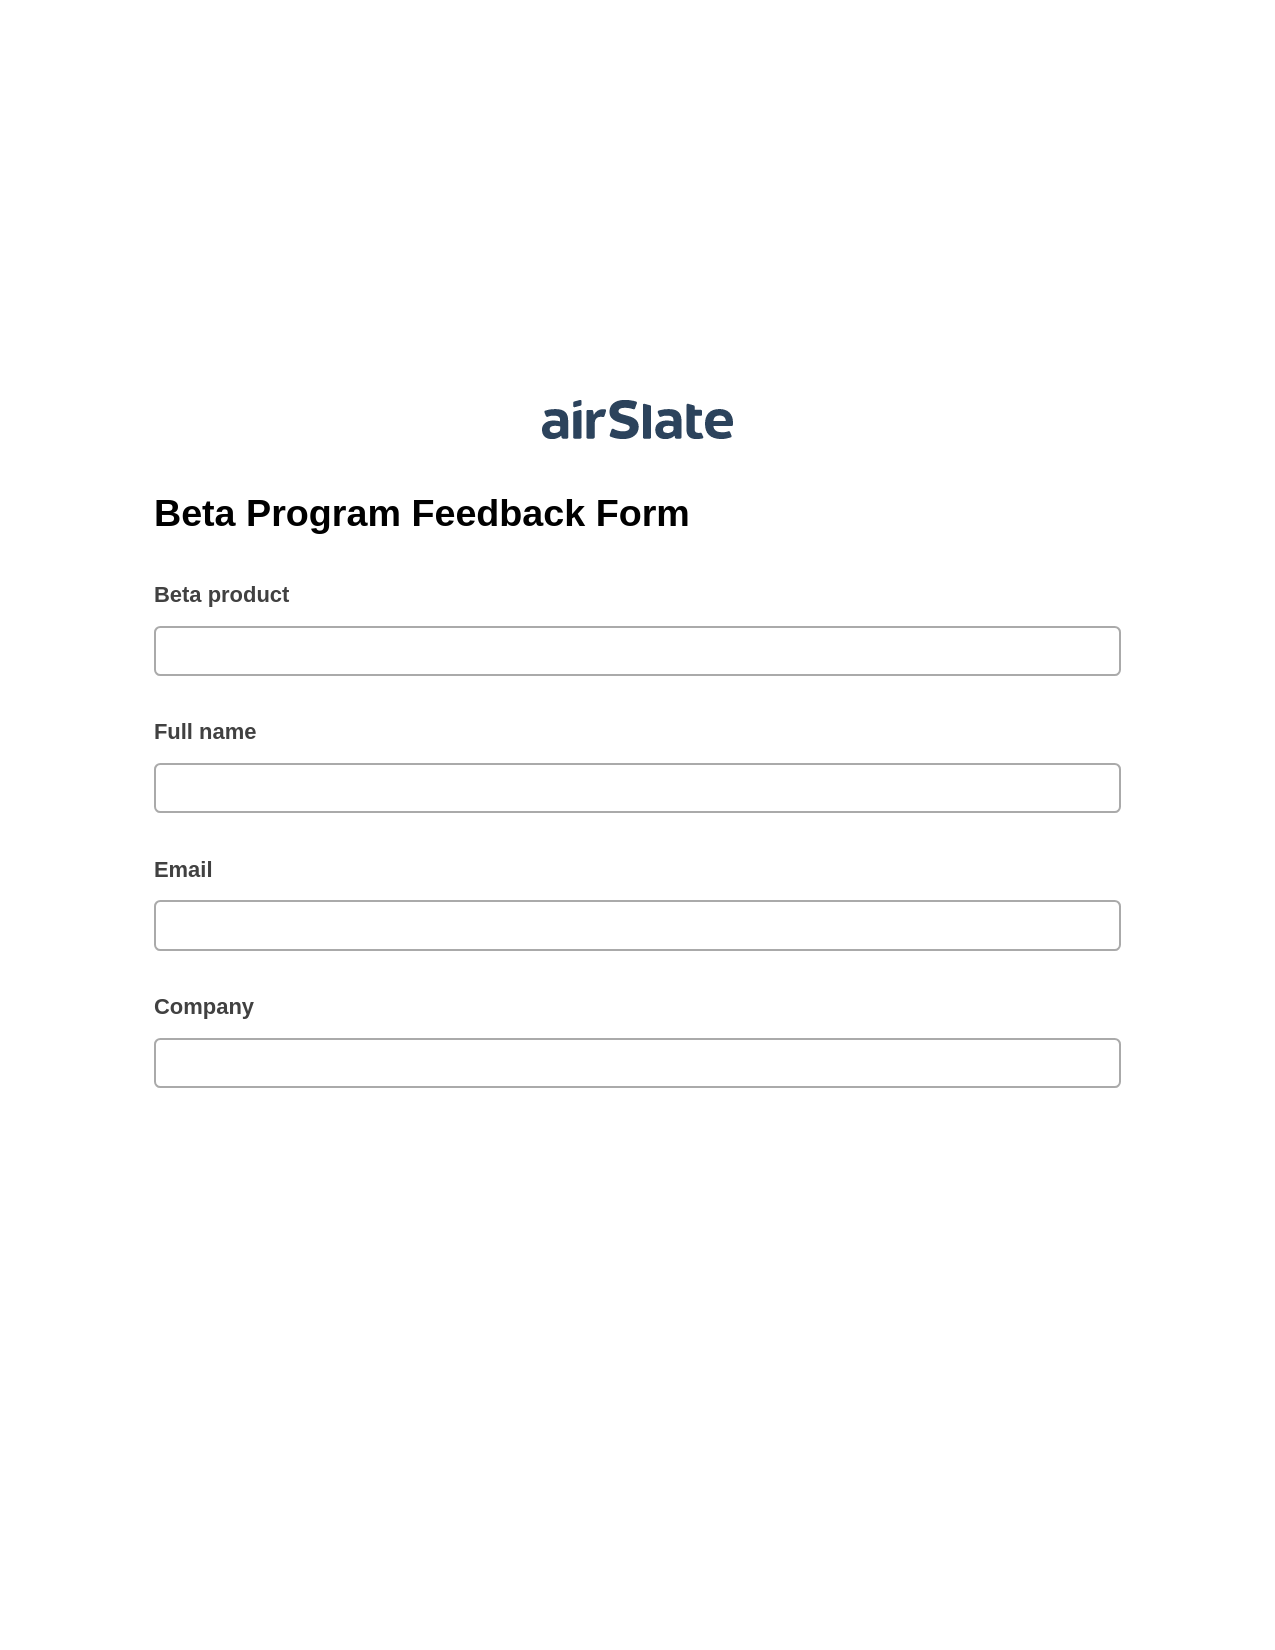 Multirole Beta Program Feedback Form Pre-fill Slate from MS Dynamics 365 Records Bot, Add Tags to Slate Bot, Export to Salesforce Bot